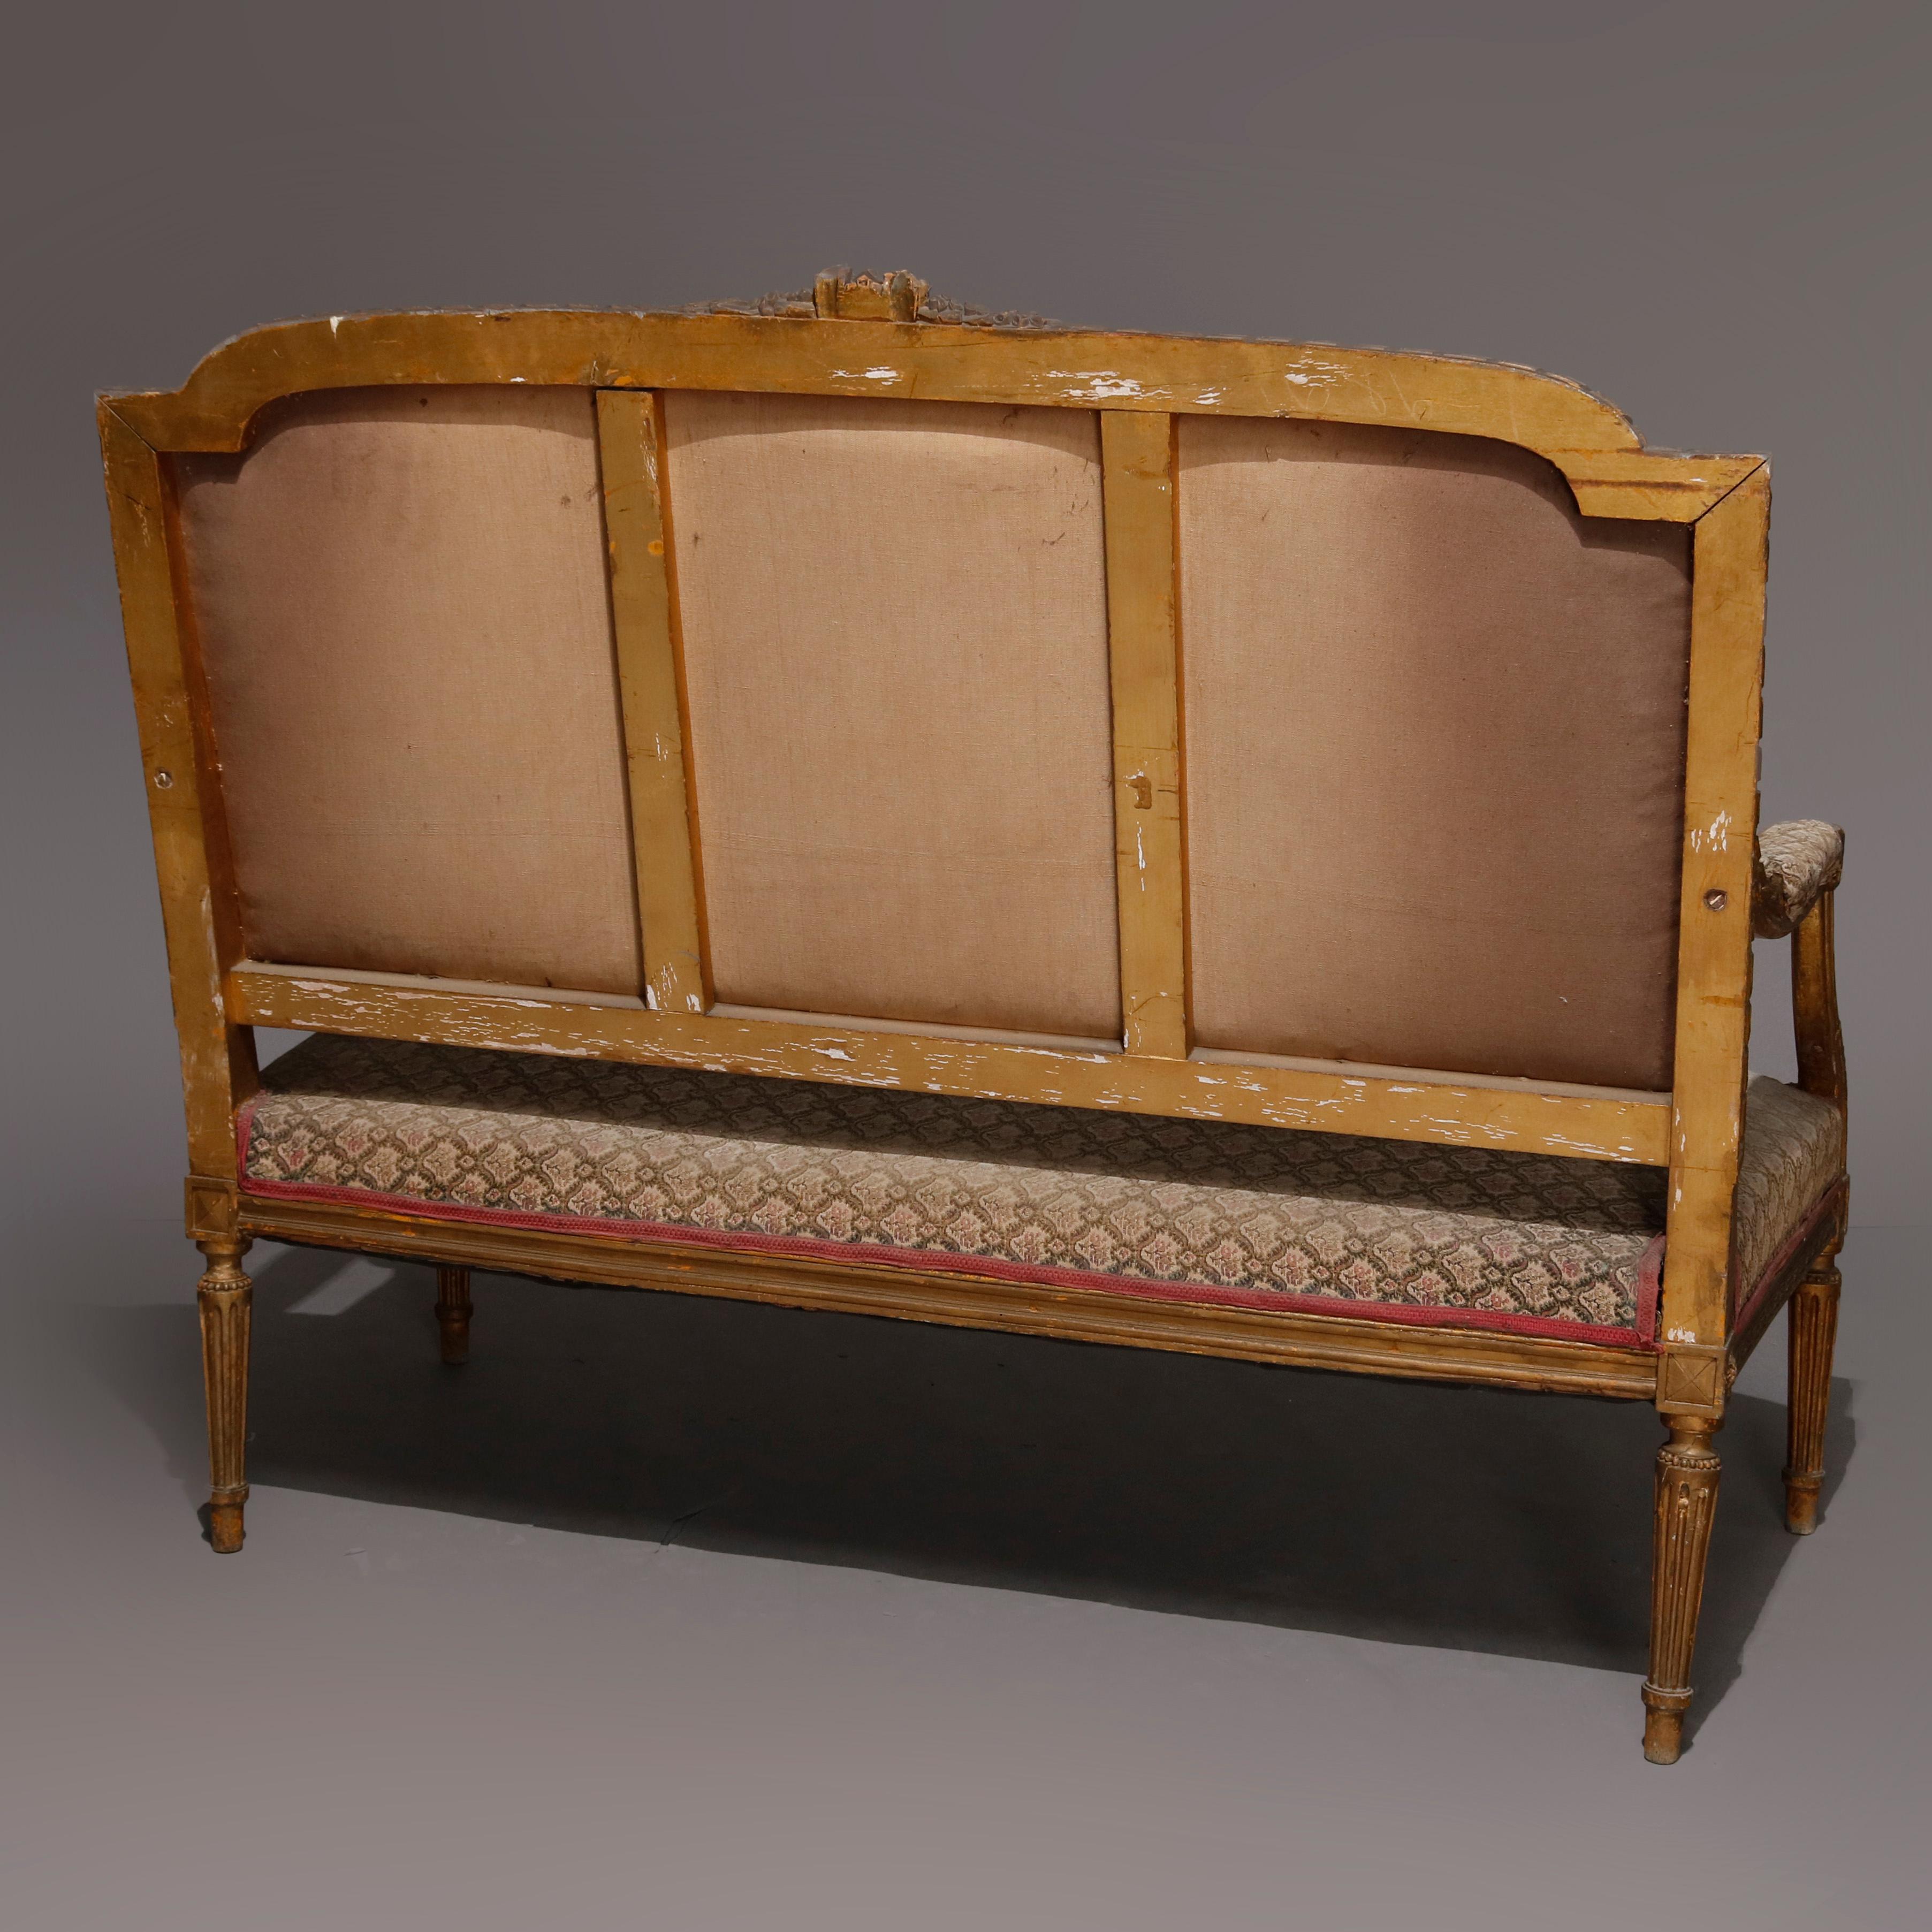 An antique French Louis XVI settee offers carved and gilt fruitwood frame with floral and foliate crest, acanthus scroll arms, rosettes and raised on reeded tapered legs, 19th century

***DELIVERY NOTICE – Due to COVID-19 we are employing NO-CONTACT